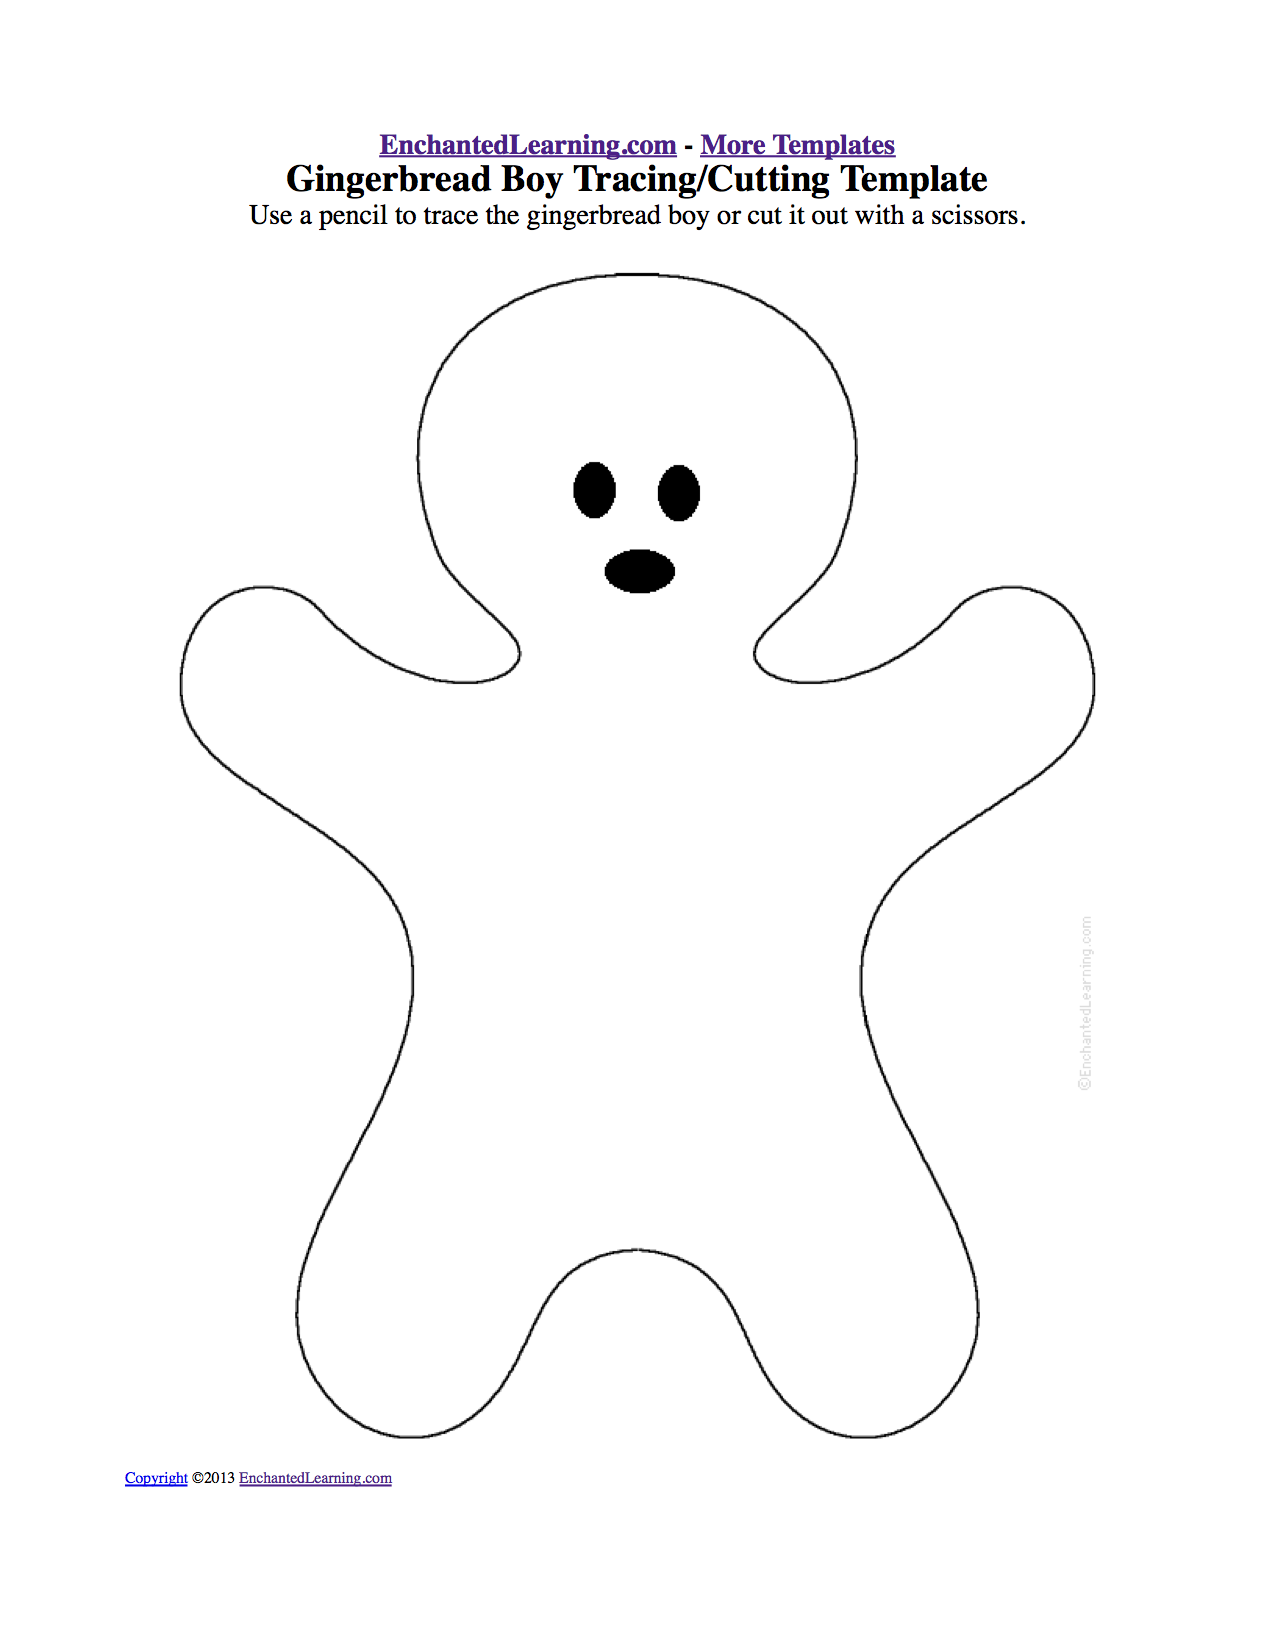 Trace or Cut Out the Gingerbread Boy